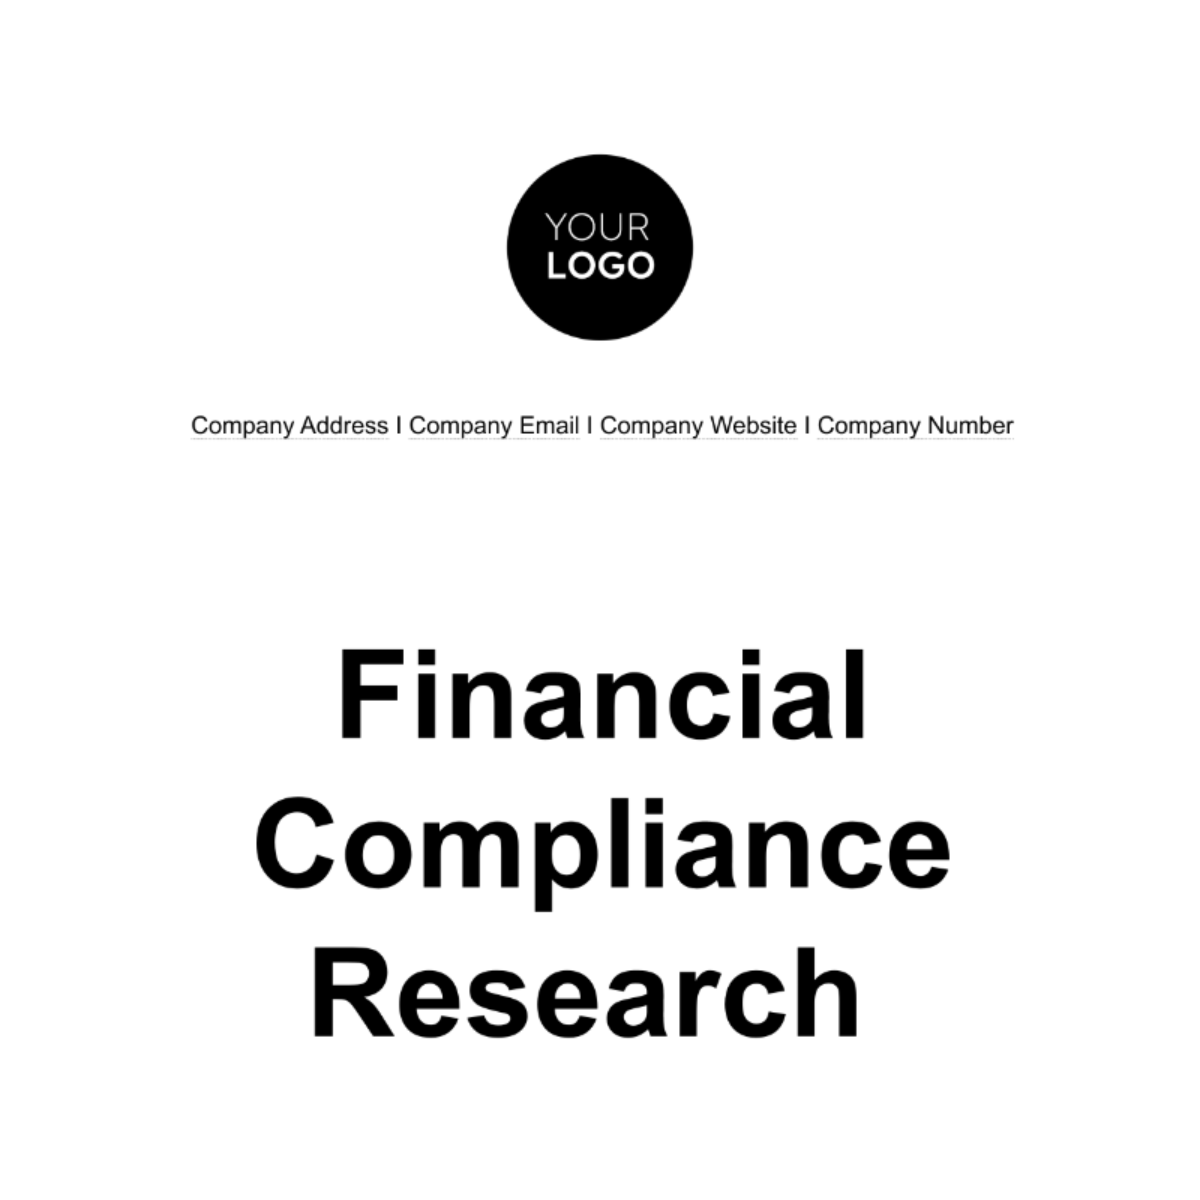 Free Financial Compliance Research Template